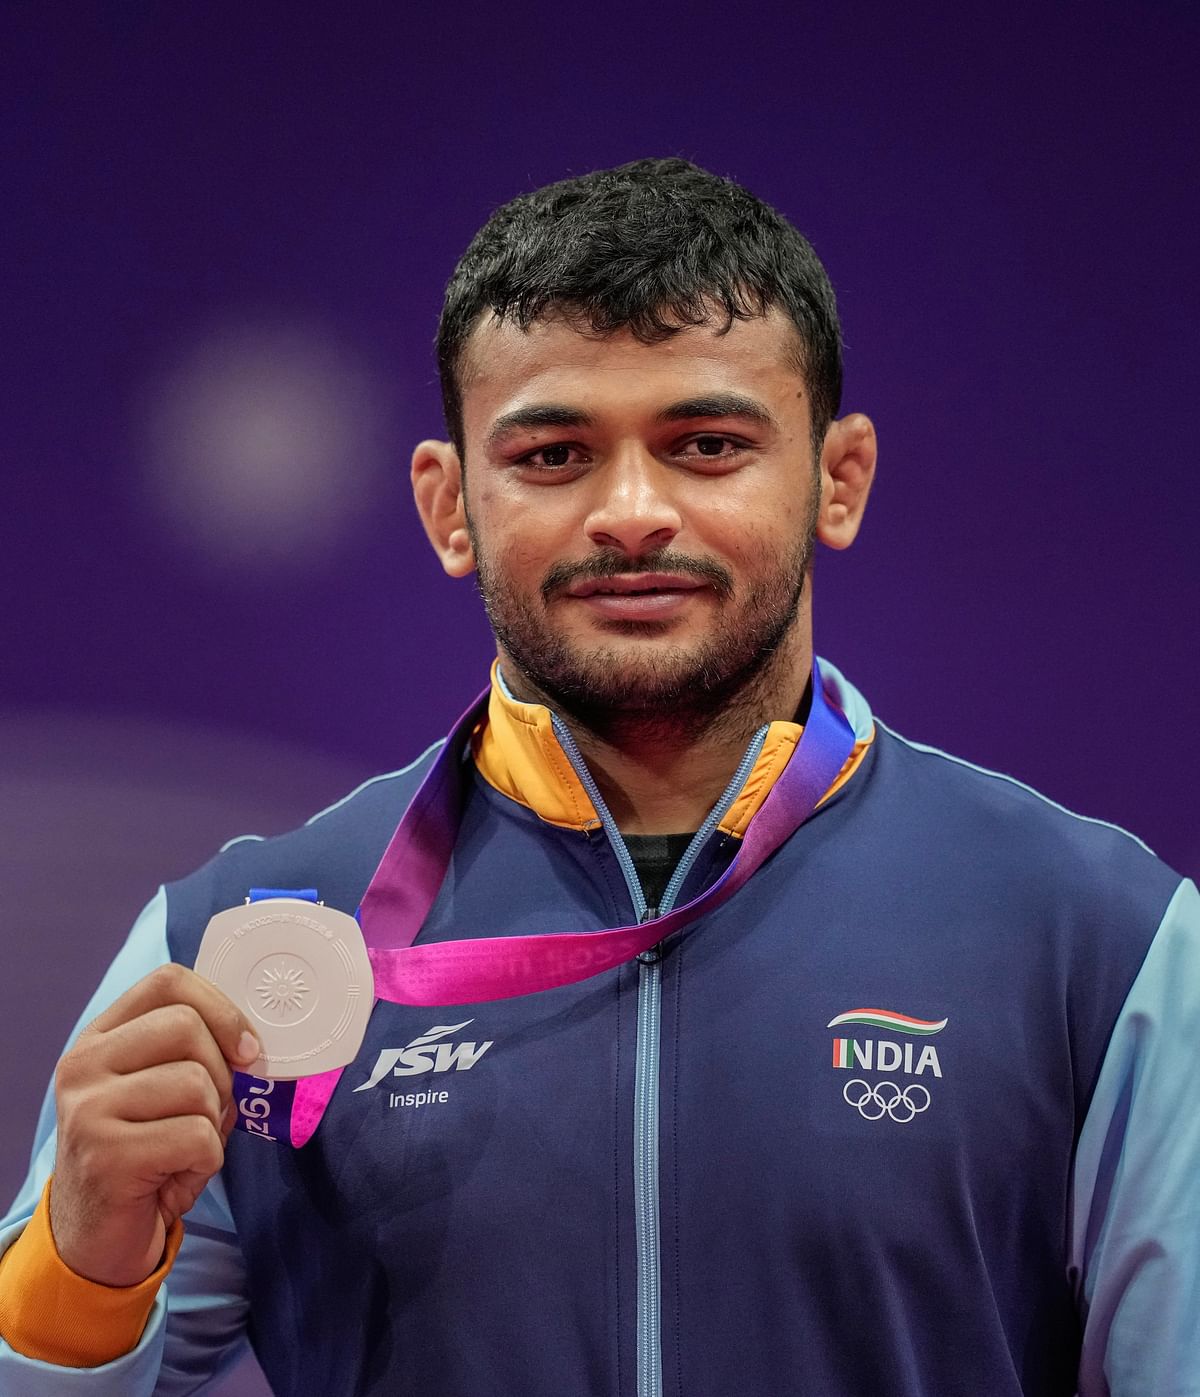 India ended Day 14 of the 2023 Asian Games with 107 medals, having crossed the 100 medal mark earlier in the day.